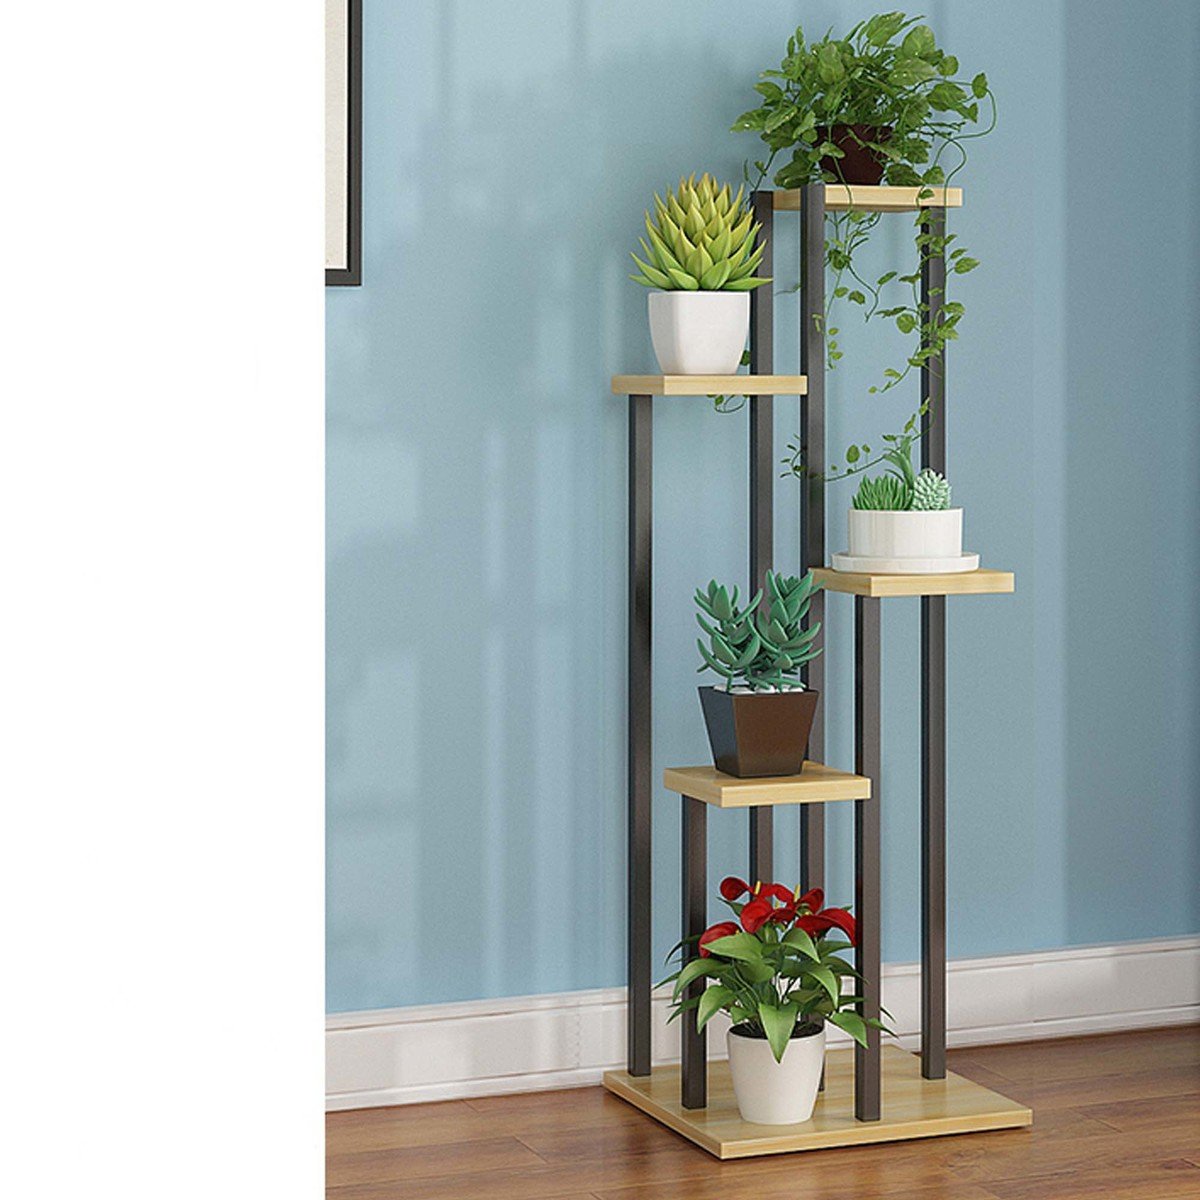 Maple Leaf Home Flower Stand FS-06 Black 100x40x40cm (Pot & Plant Not Included)